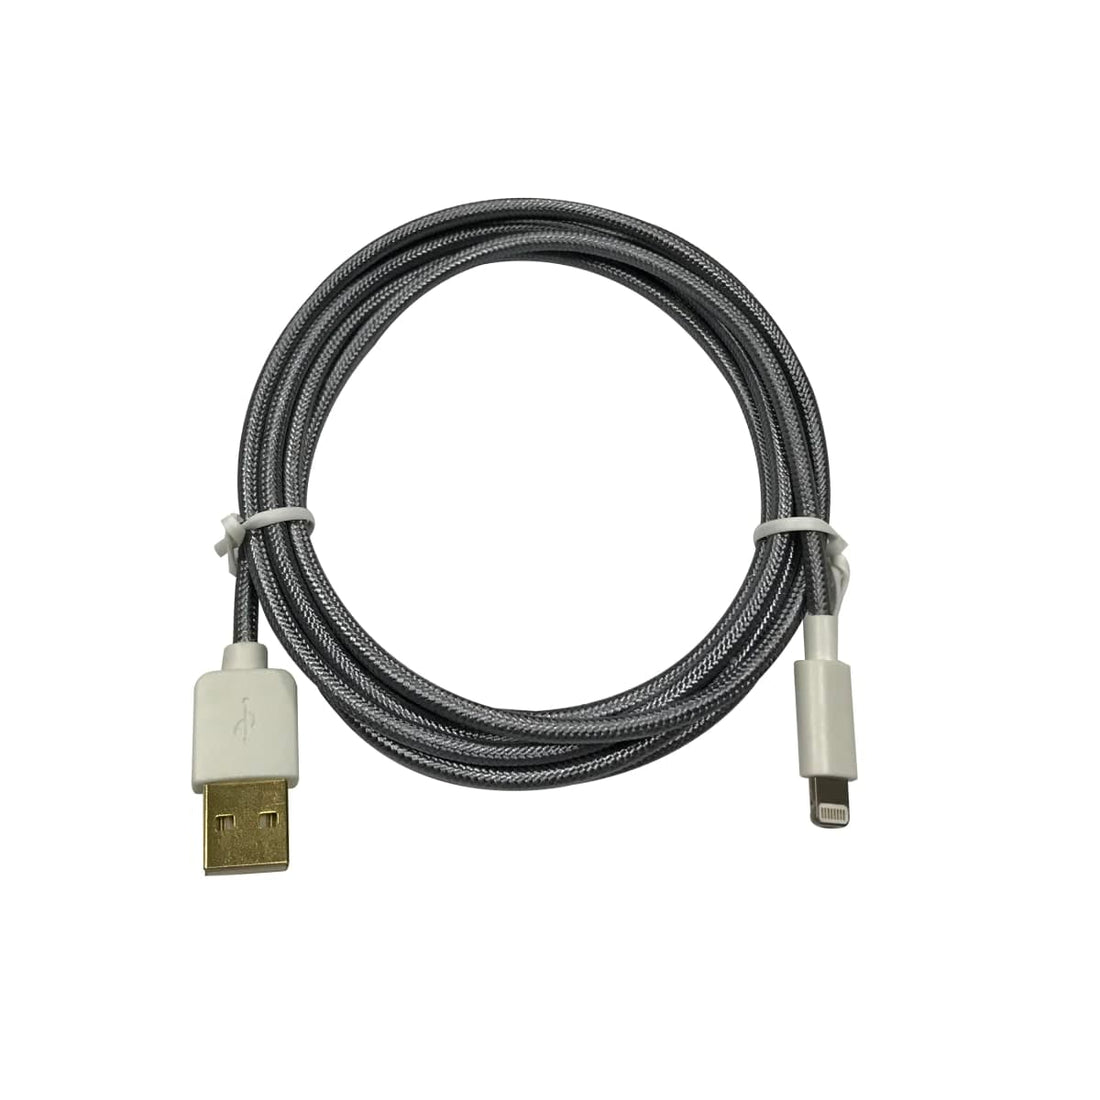 APPLE CABLE 2MT LIGHTNING TYPE / A TYPE USB GREY - best price from Maltashopper.com BR420005312